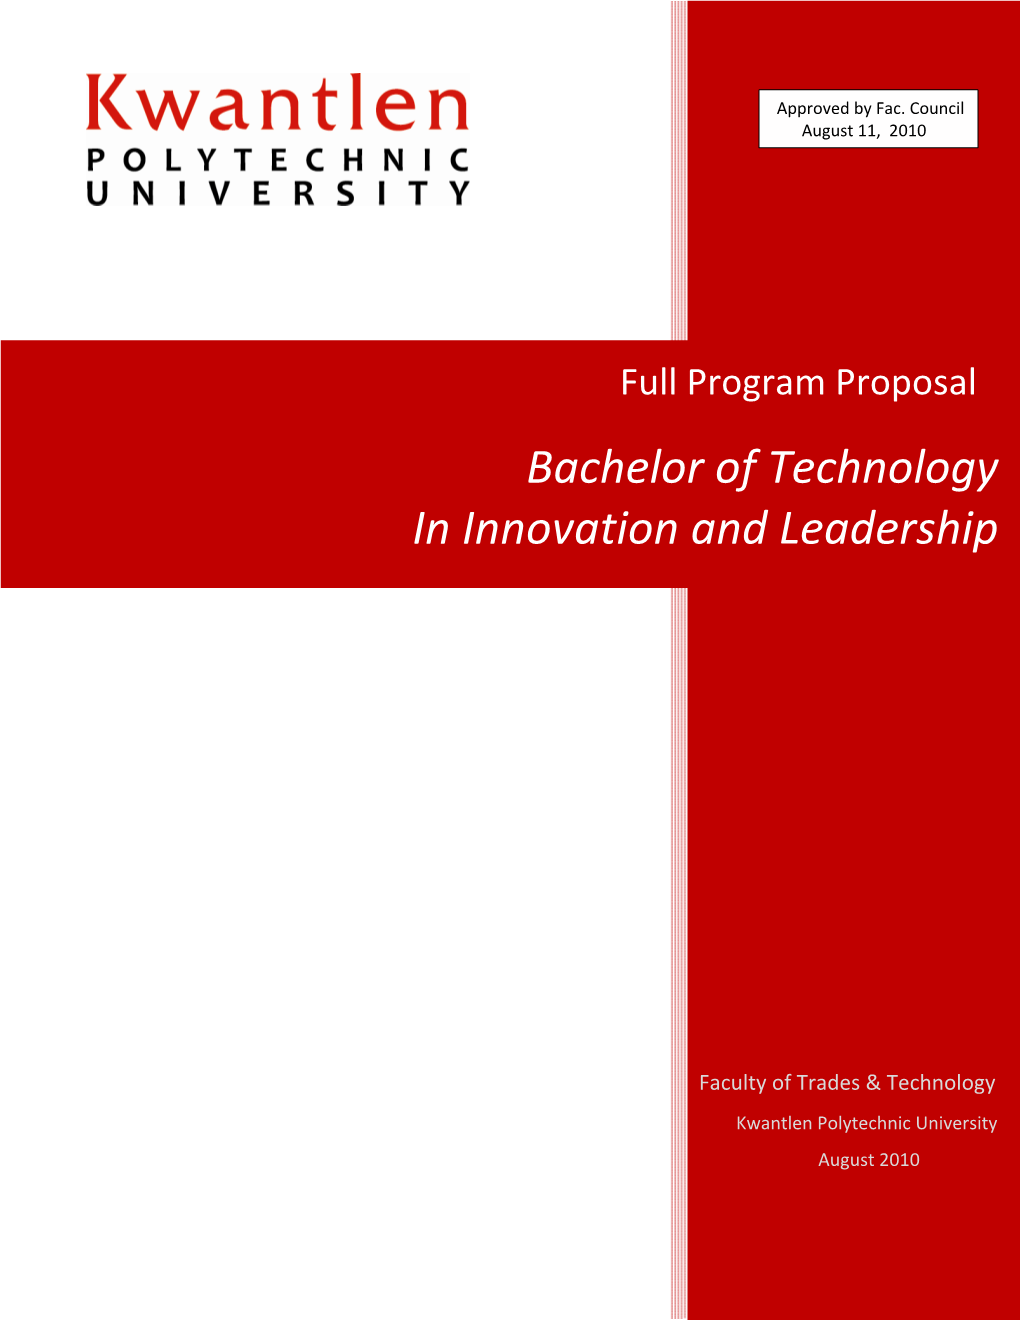 Bachelor of Technology in Innovation and Leadership